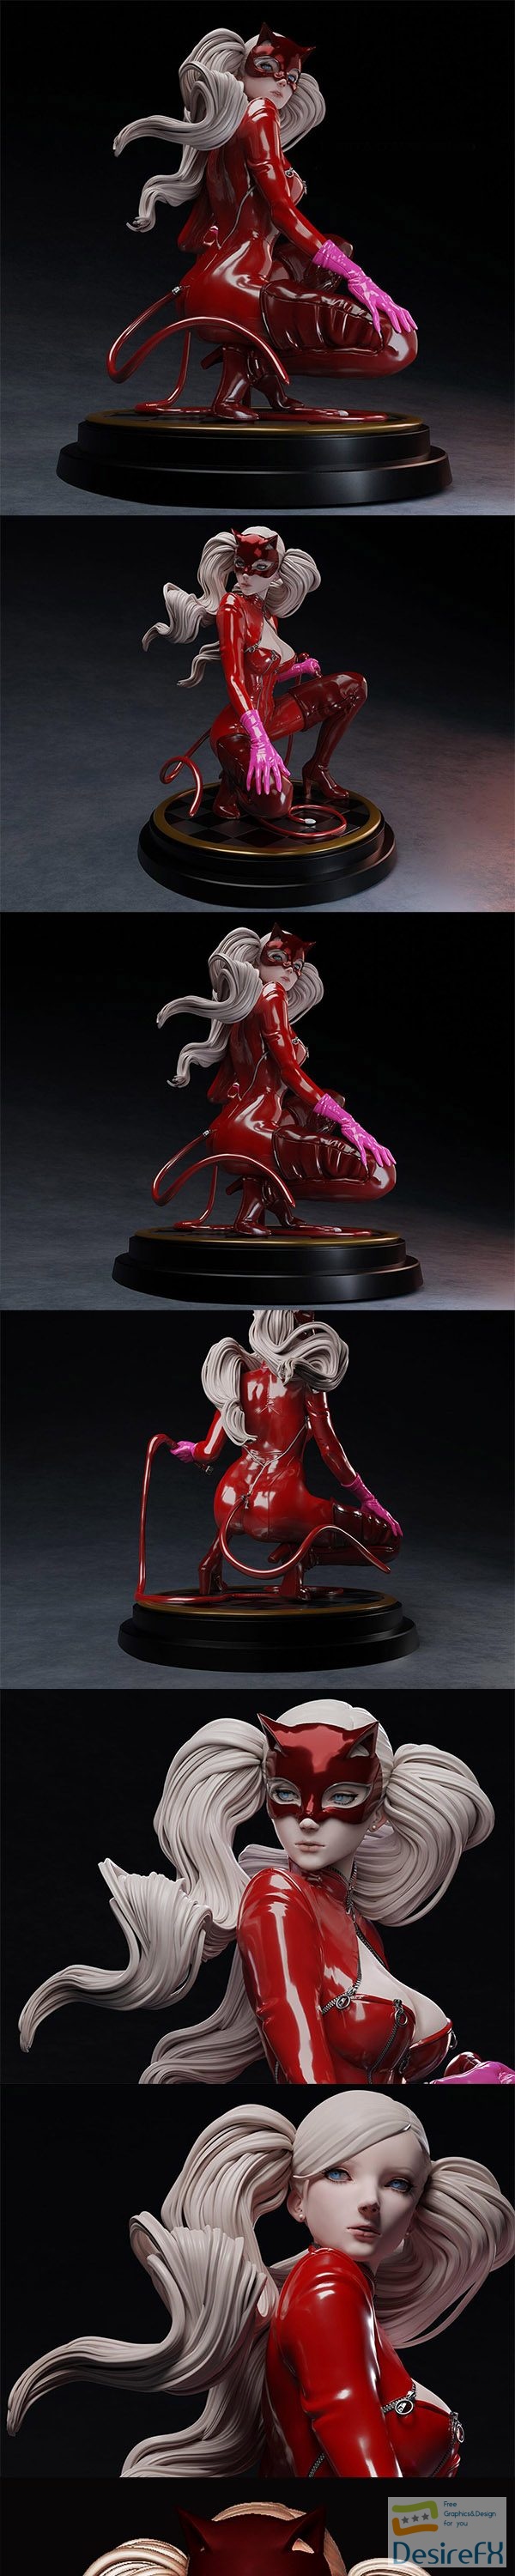 Nympha – Ann Takamaki from Persona 5 – 3D Print